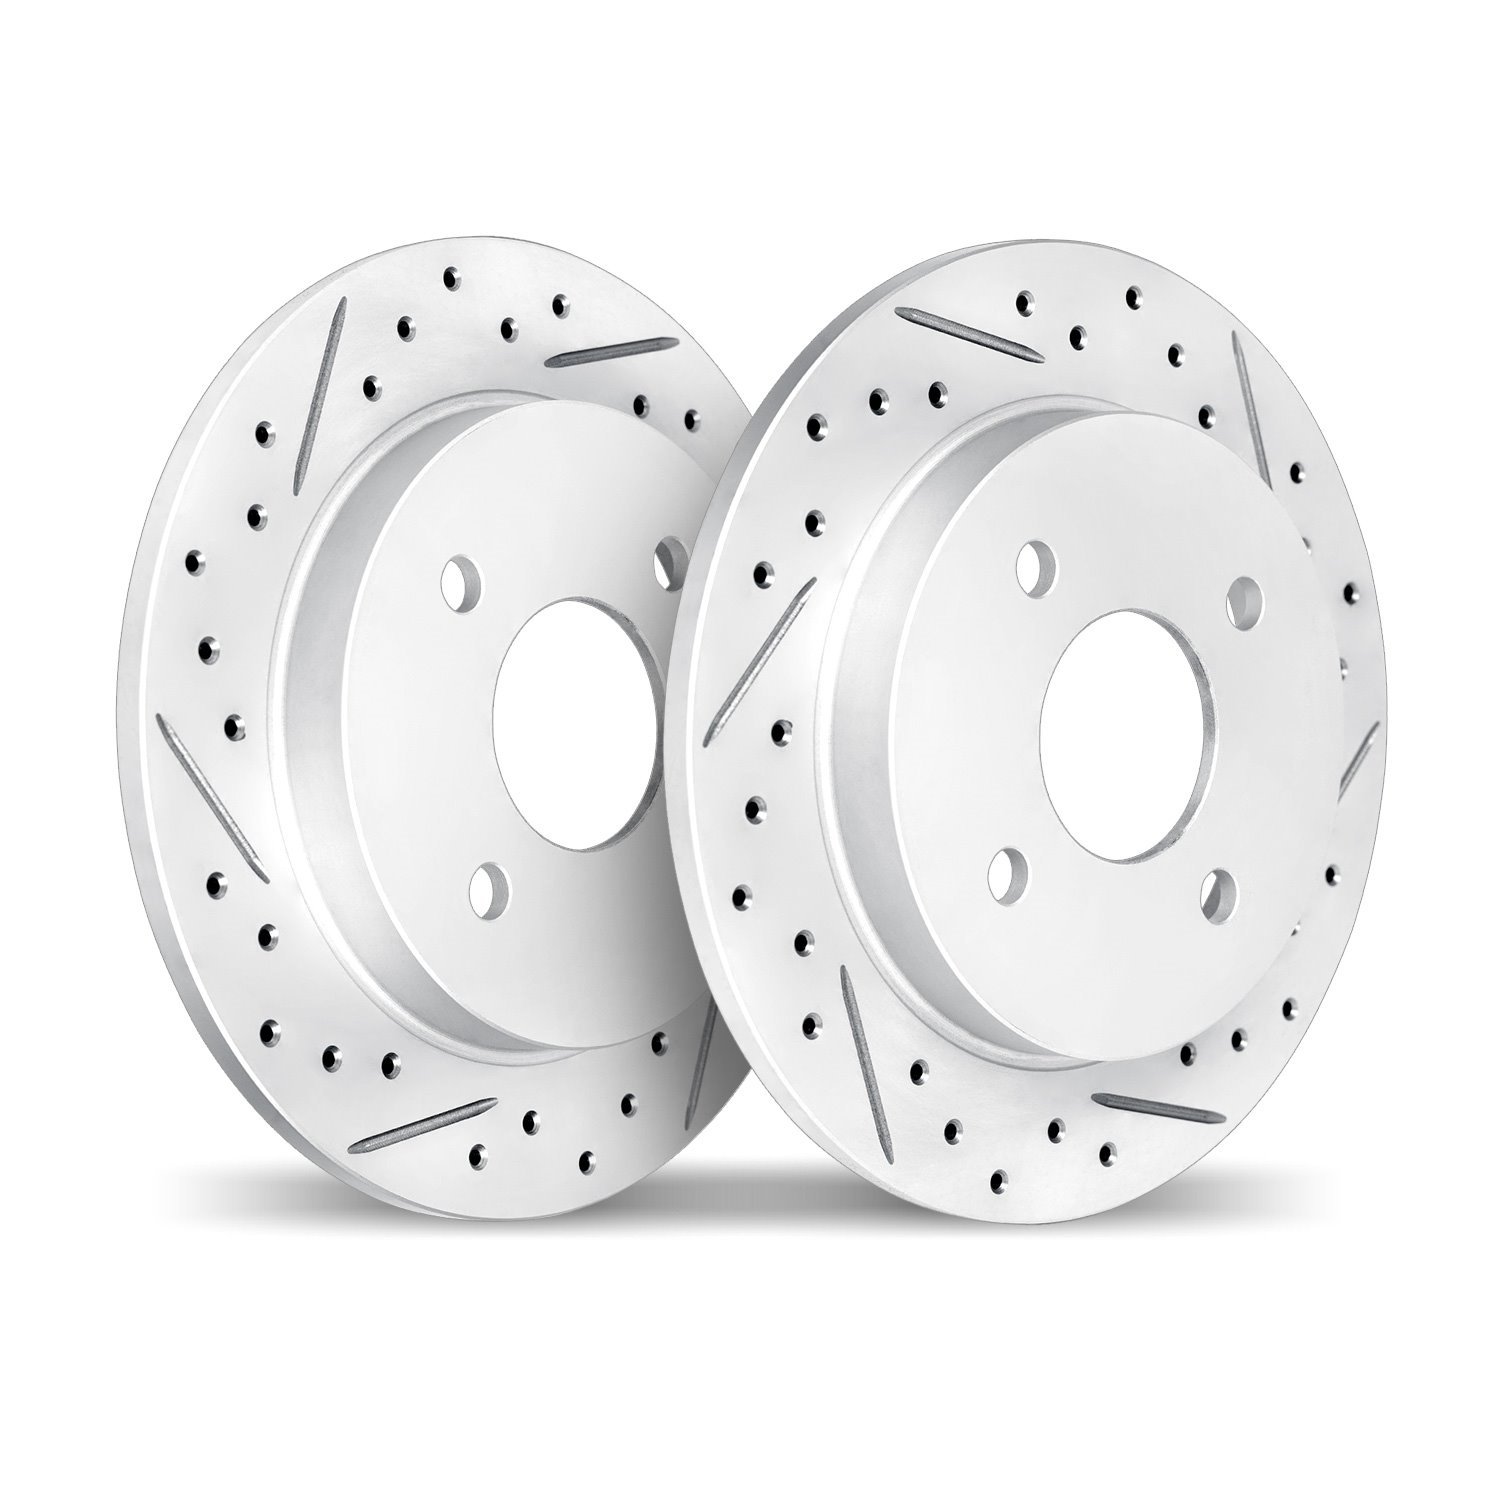 2002-08000 Geoperformance Drilled/Slotted Brake Rotors, 1976-1982 Lancia, Position: Front